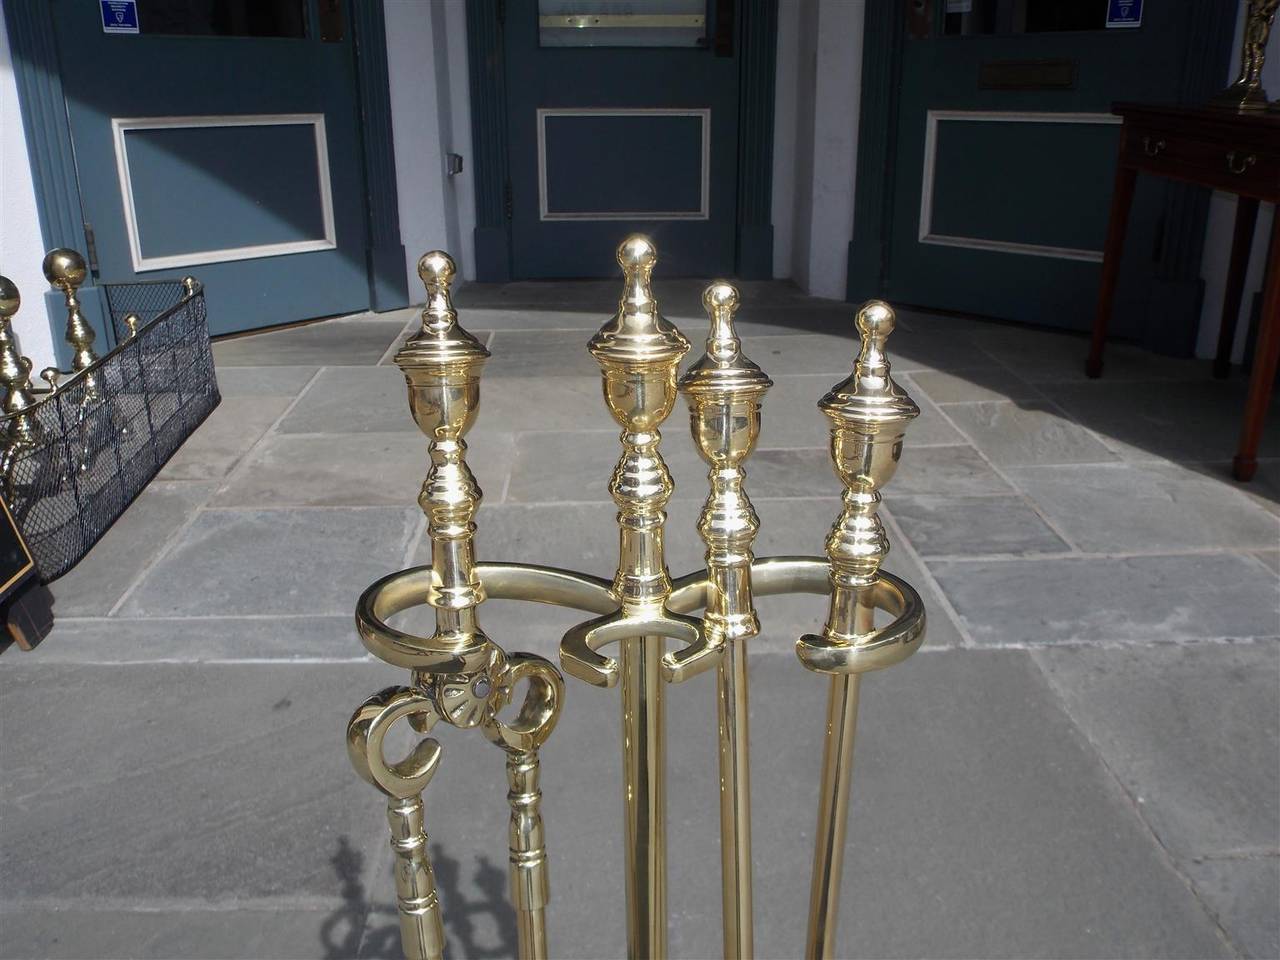 Set of American Brass Urn Finial Top Fire Tools on Stand, Circa 1870 In Excellent Condition For Sale In Hollywood, SC